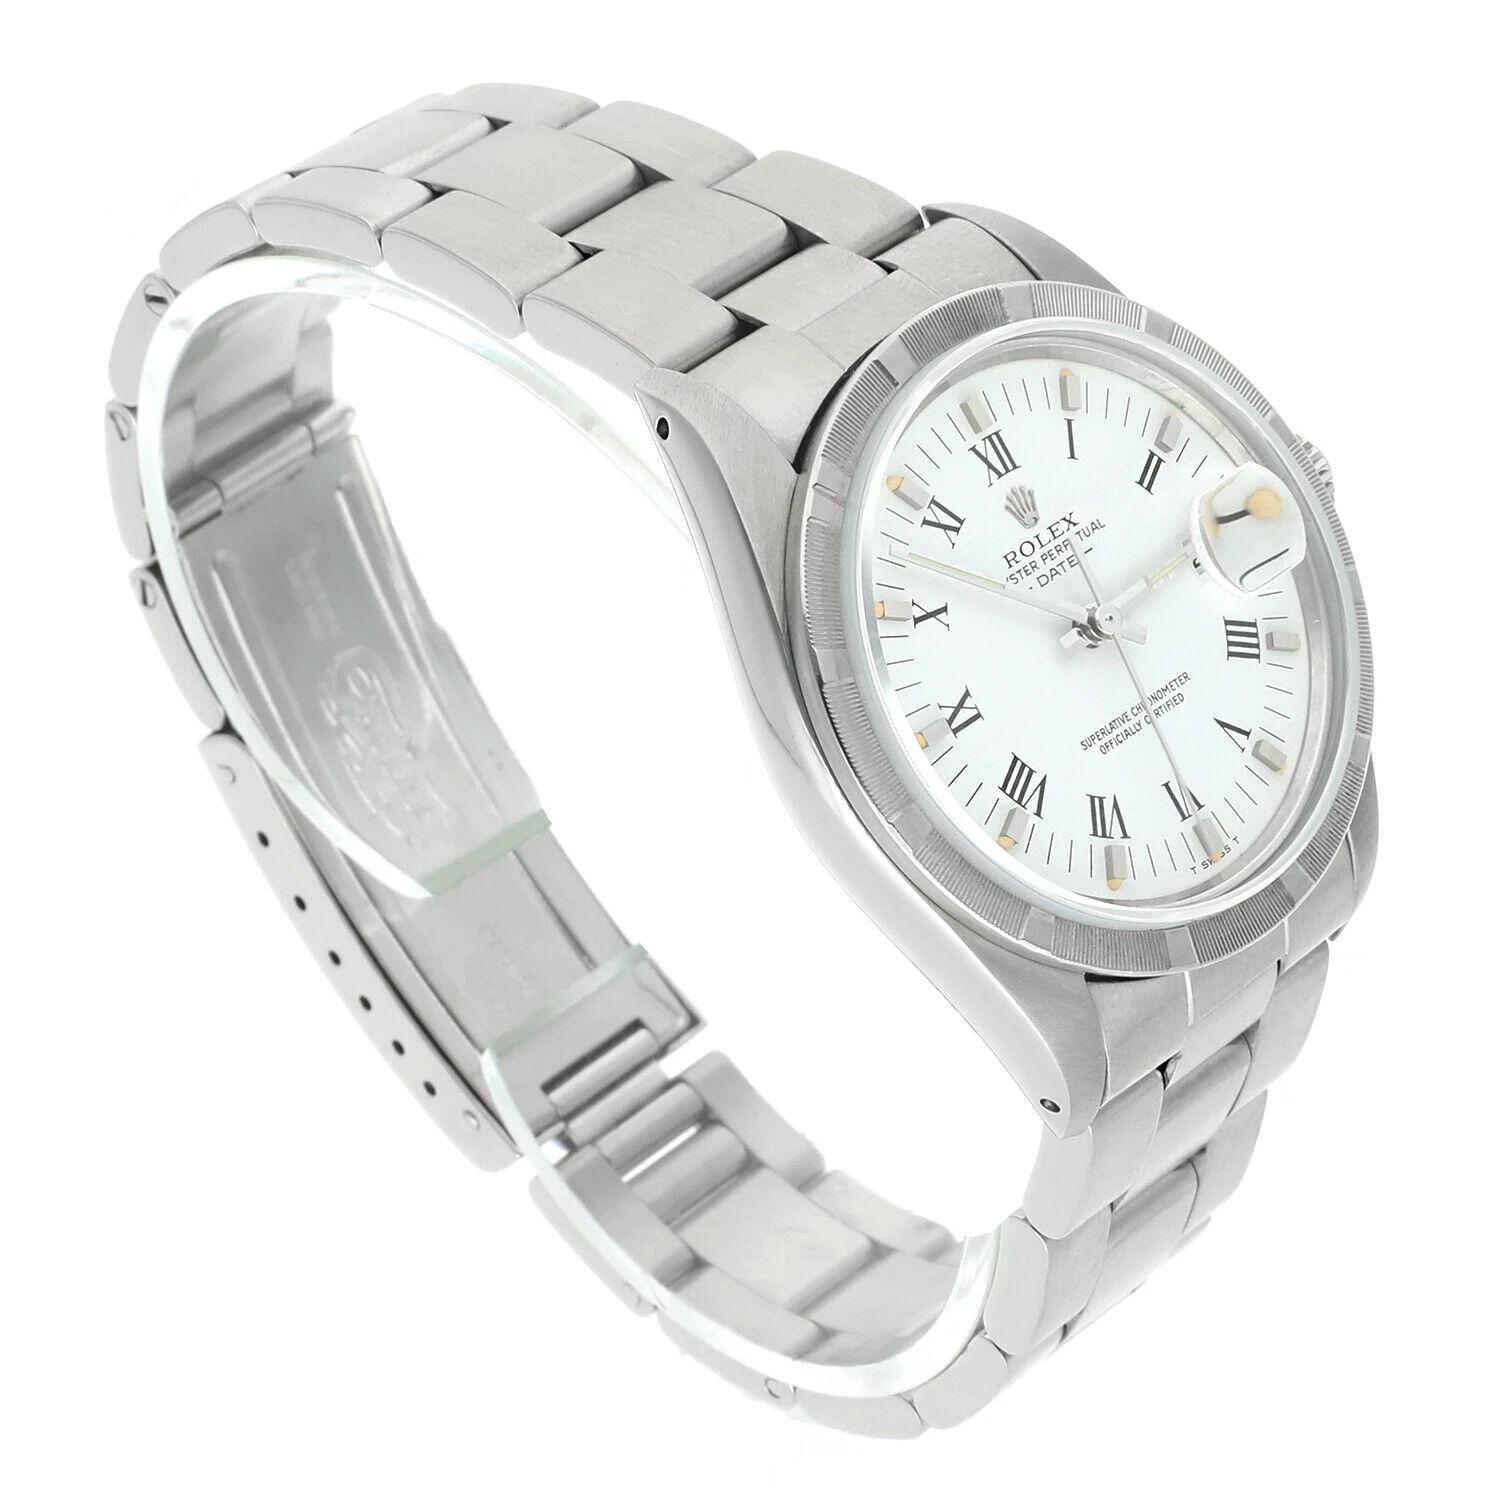 Unisex Rolex Date Stainless Steel Watch Oyster White Roman Dial 15010 Circa 1988 For Sale 1